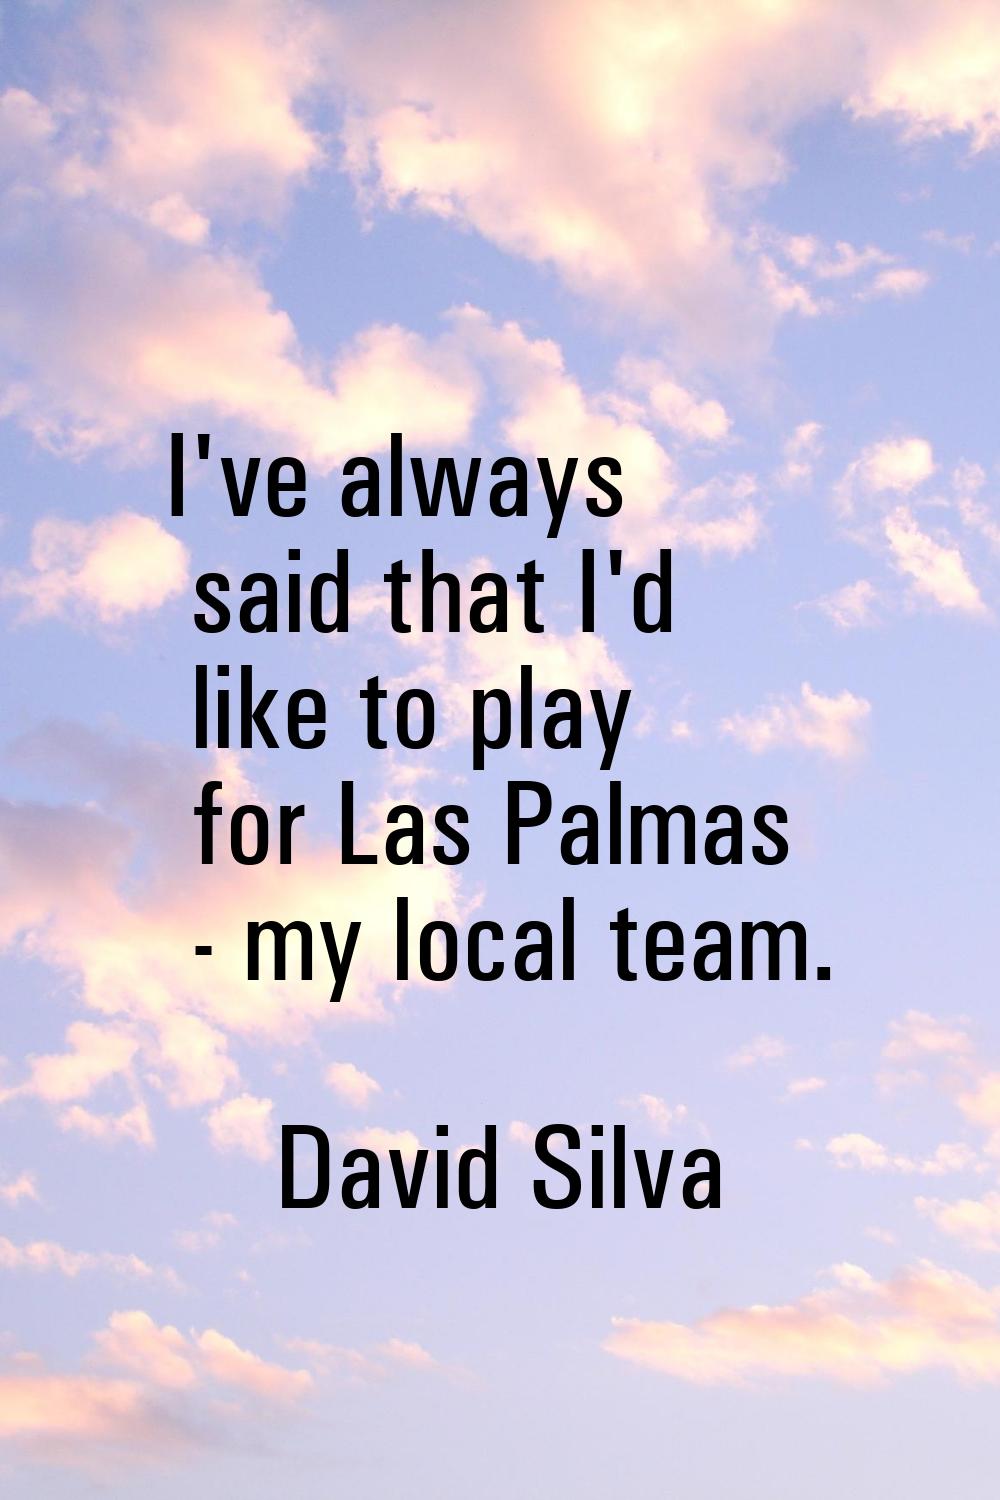 I've always said that I'd like to play for Las Palmas - my local team.